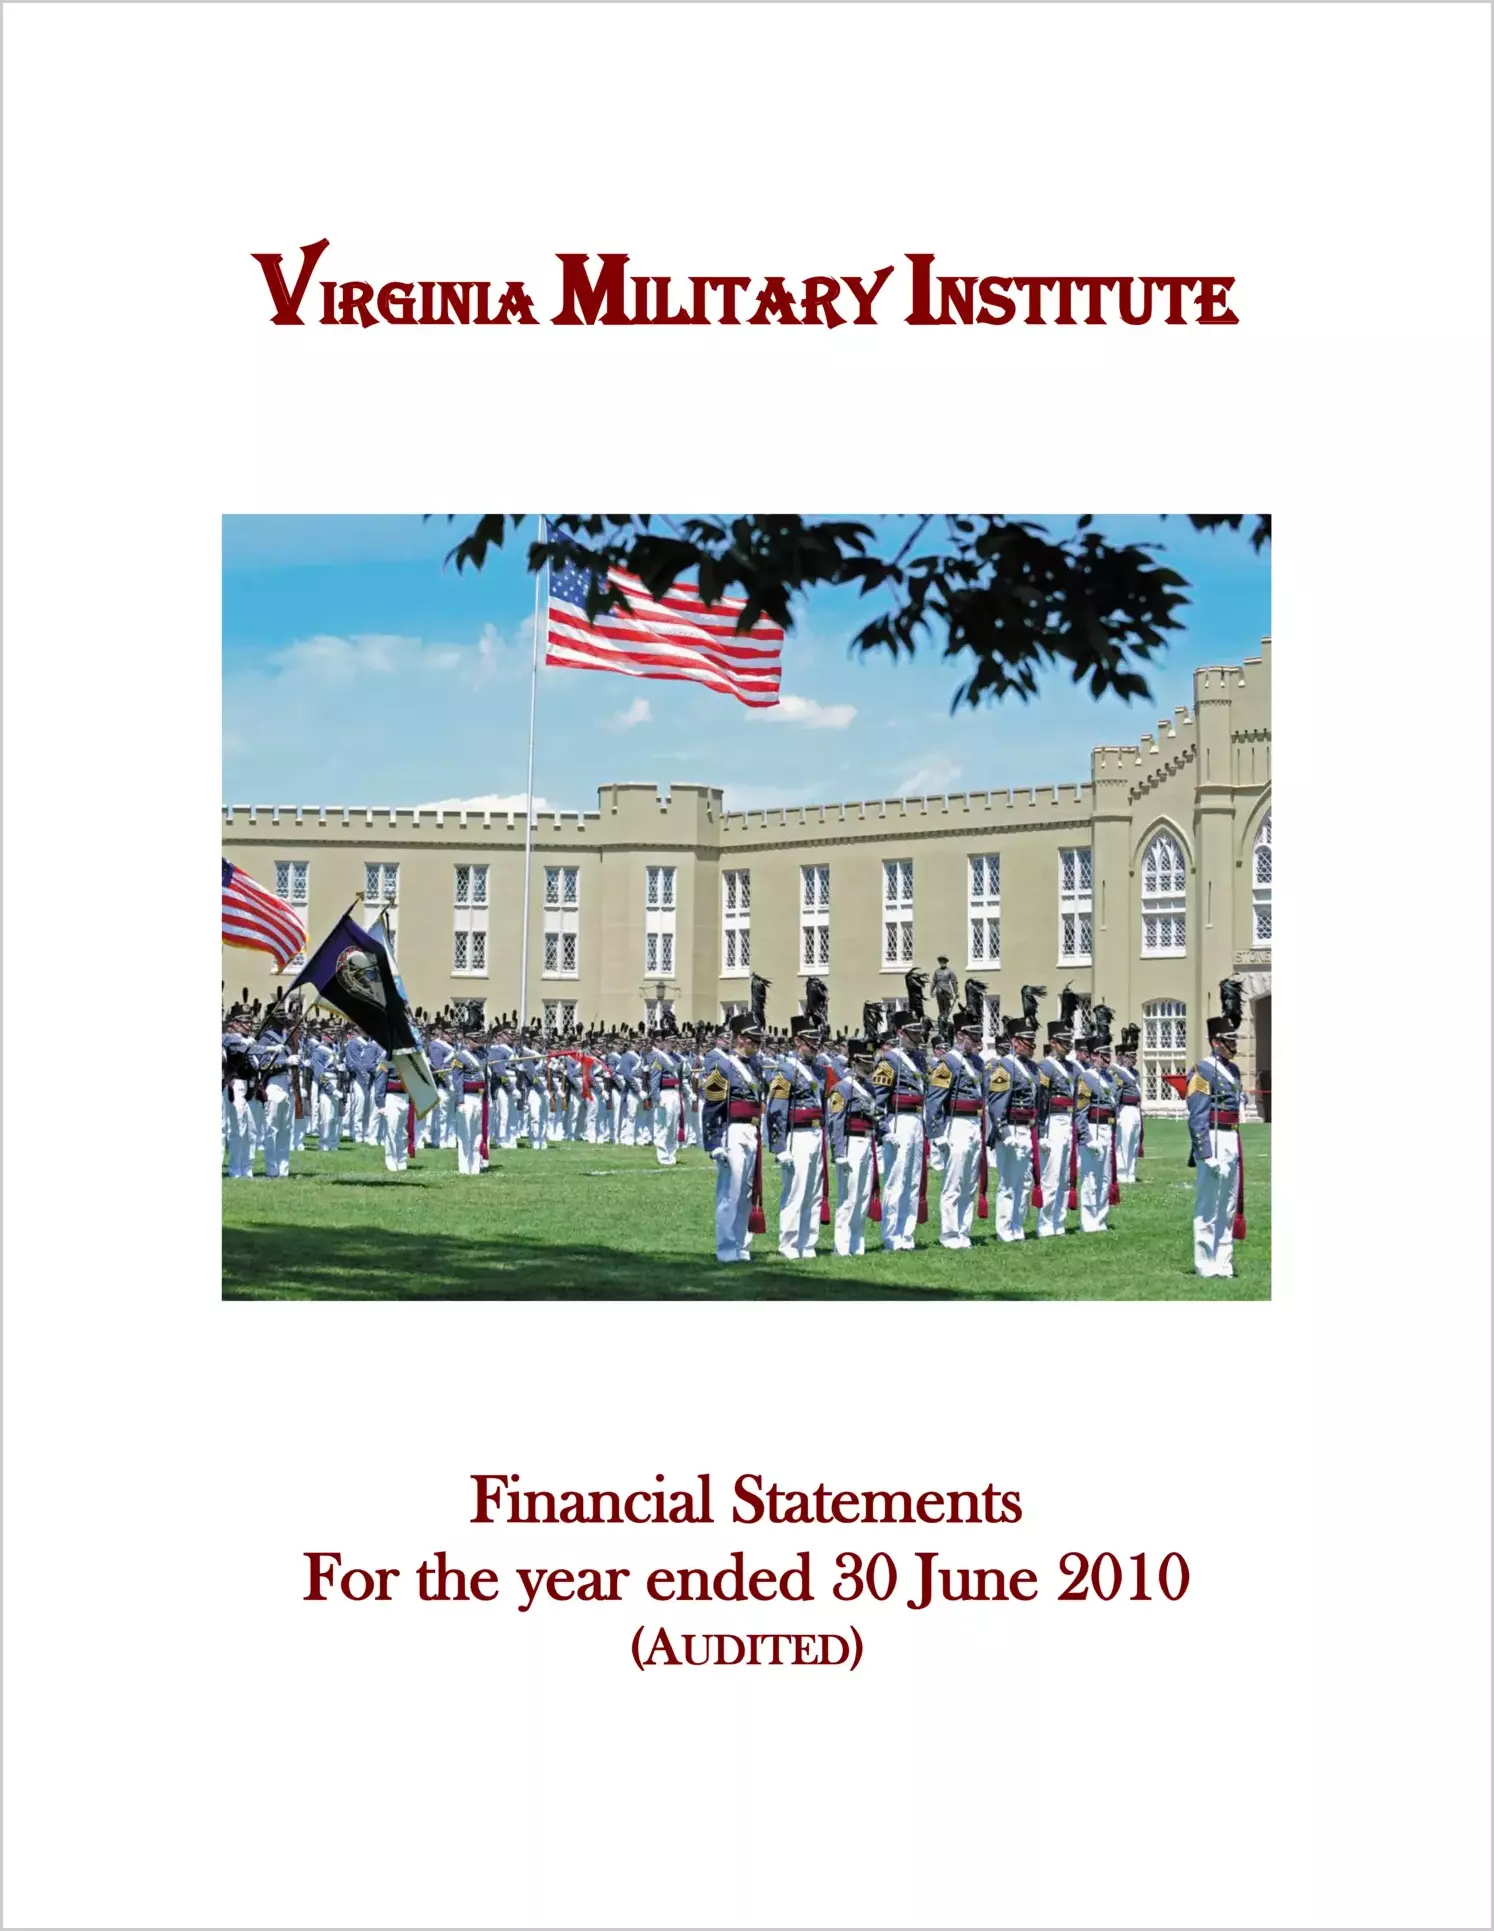 Virginia Military Institute Financial Statements for year ended June 30, 2010